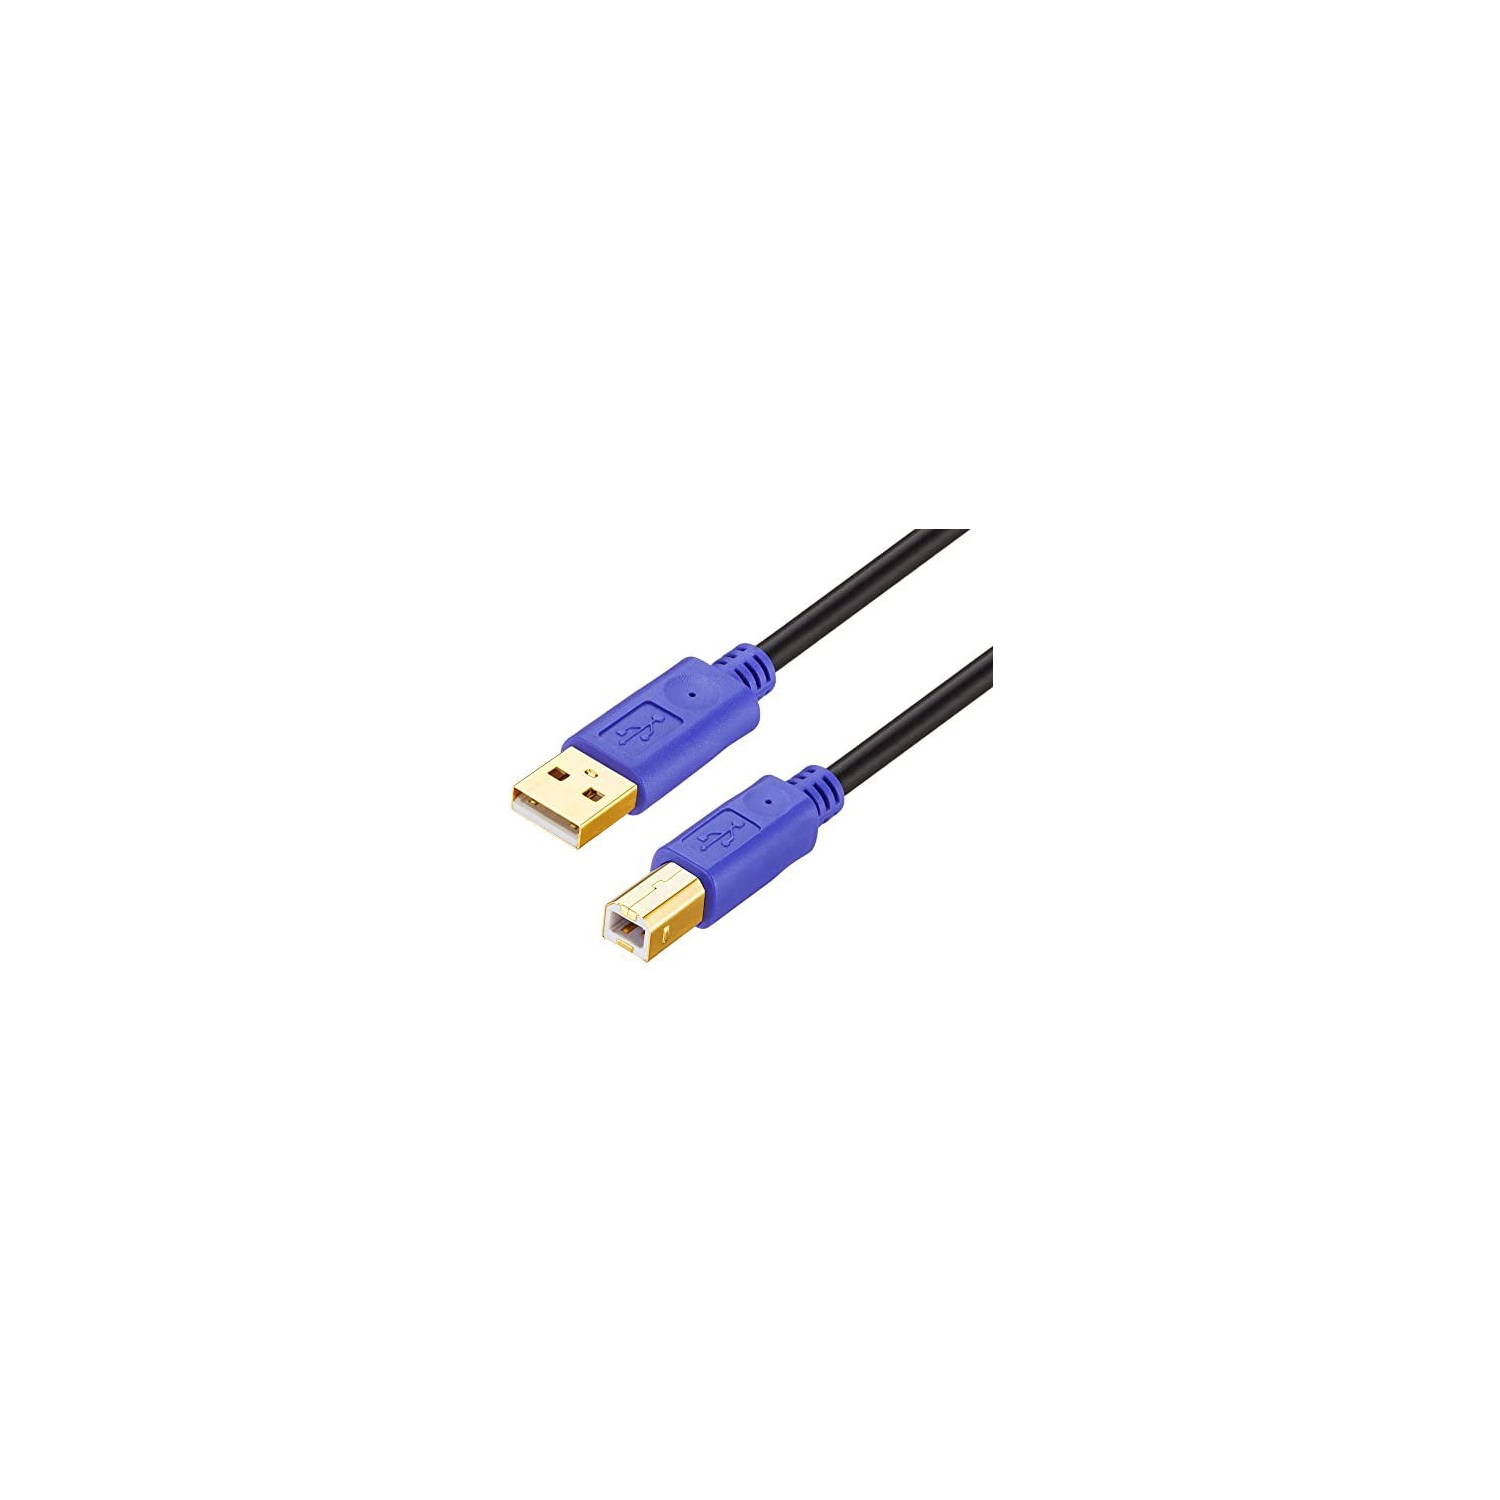 Printer Cable 6ft, LiuTian USB Printer Cable Type A Male to B Male Scanner Cord USB B Cable High Speed for HP, Canon,